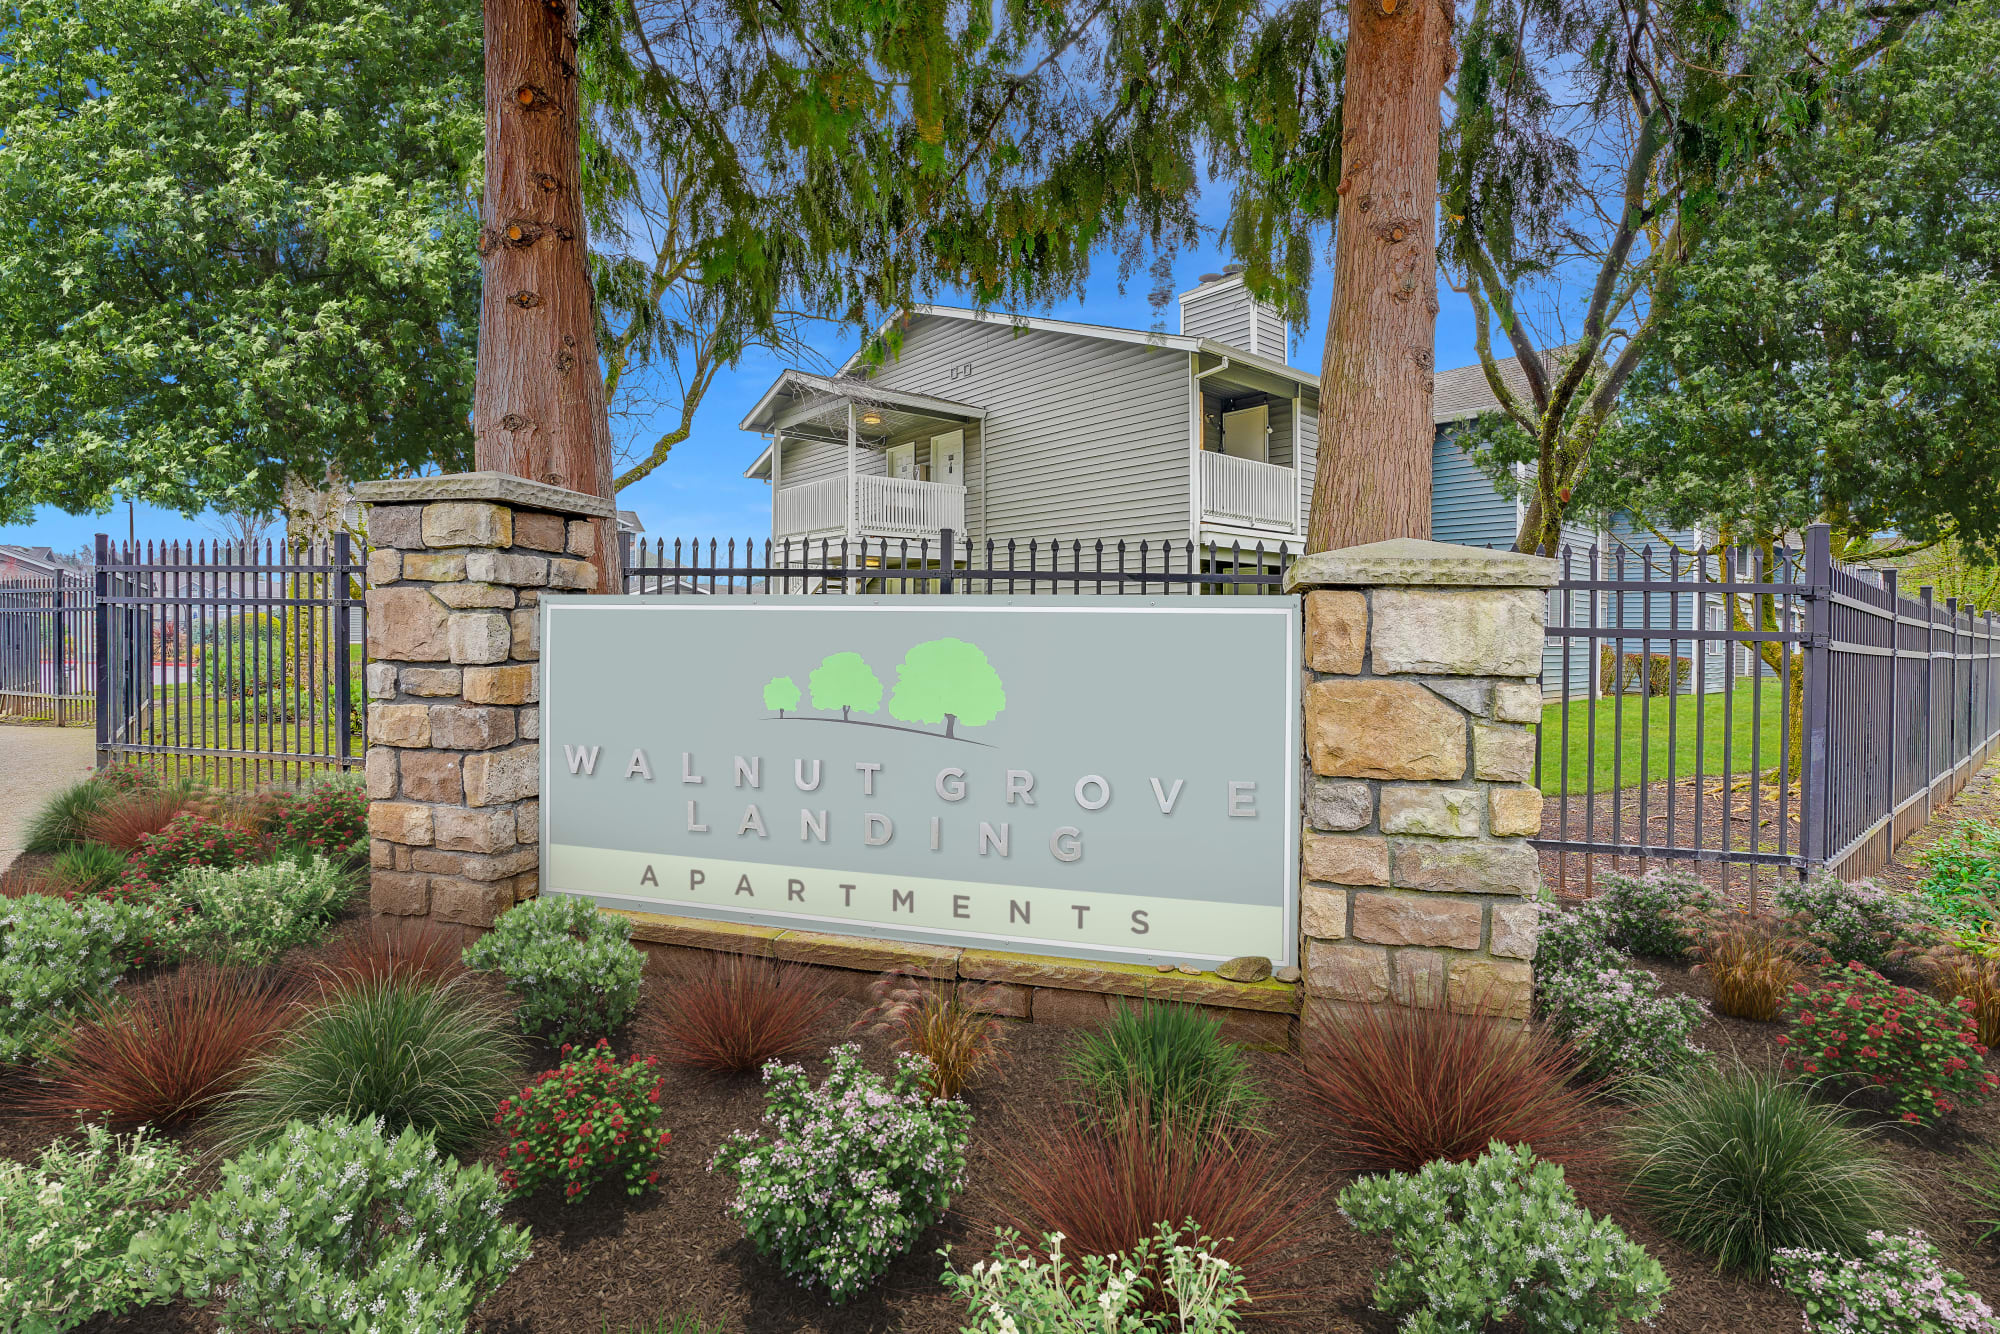 Monument sign at the entryway of Walnut Grove Landing Apartments in Vancouver, Washington